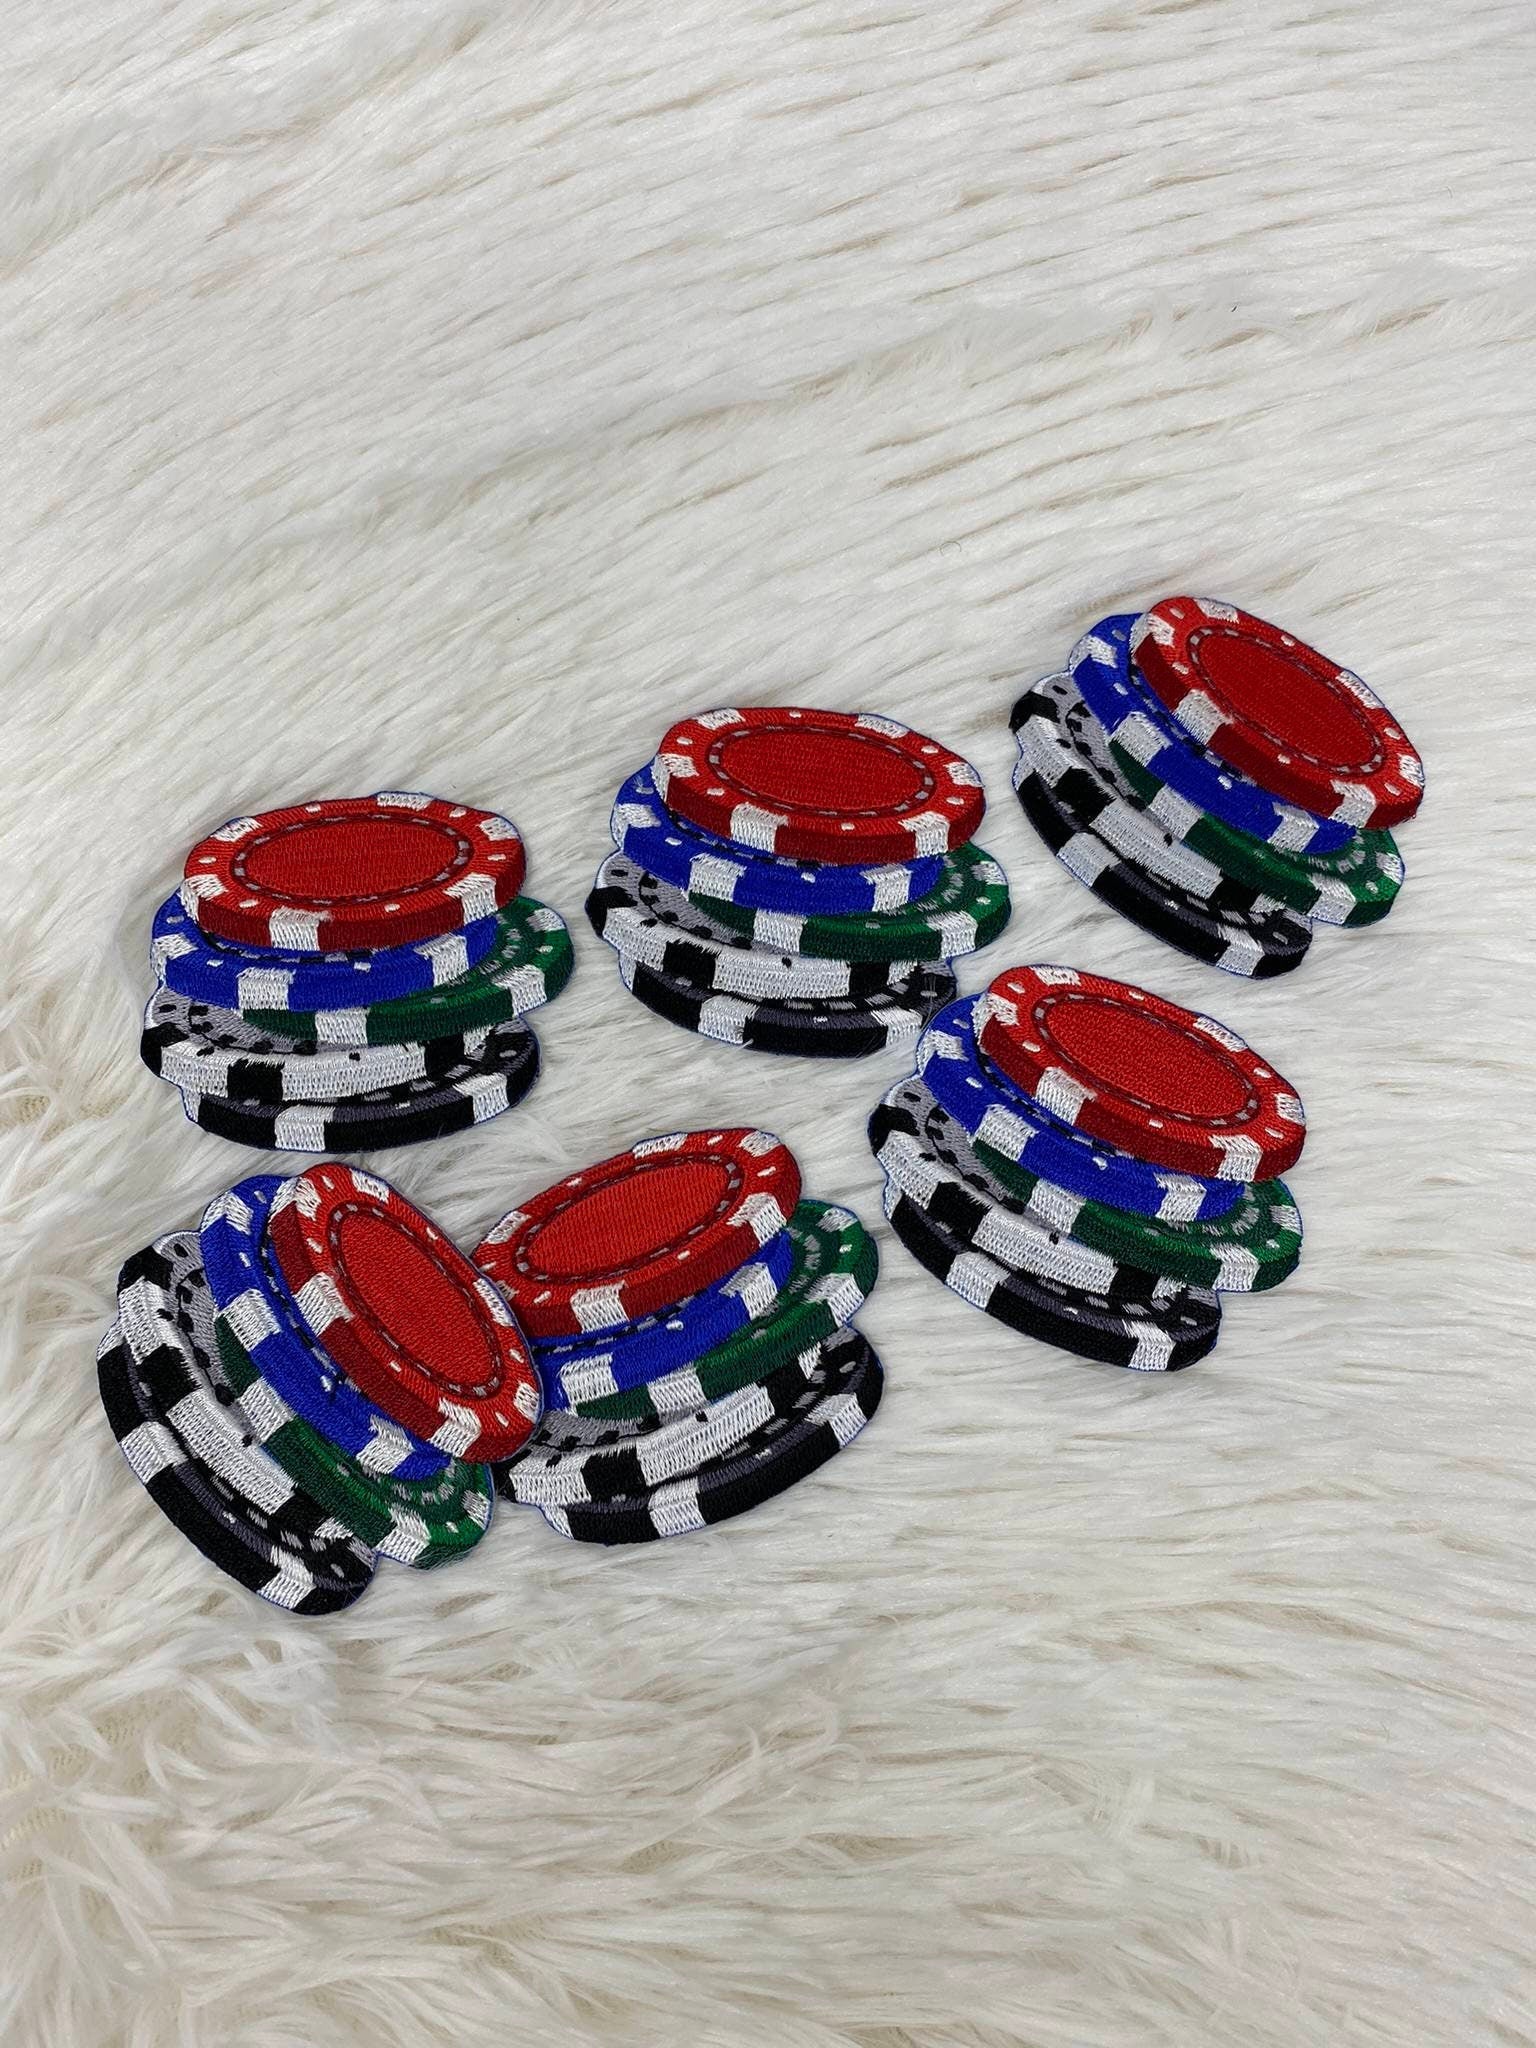 Casino Chips, Token Patch, Size 2.75", 1-pc, Iron-on Applique for Clothing, Hats, Shoes, Cool Gift Idea for Gambling, Jackpot Patch, Poker